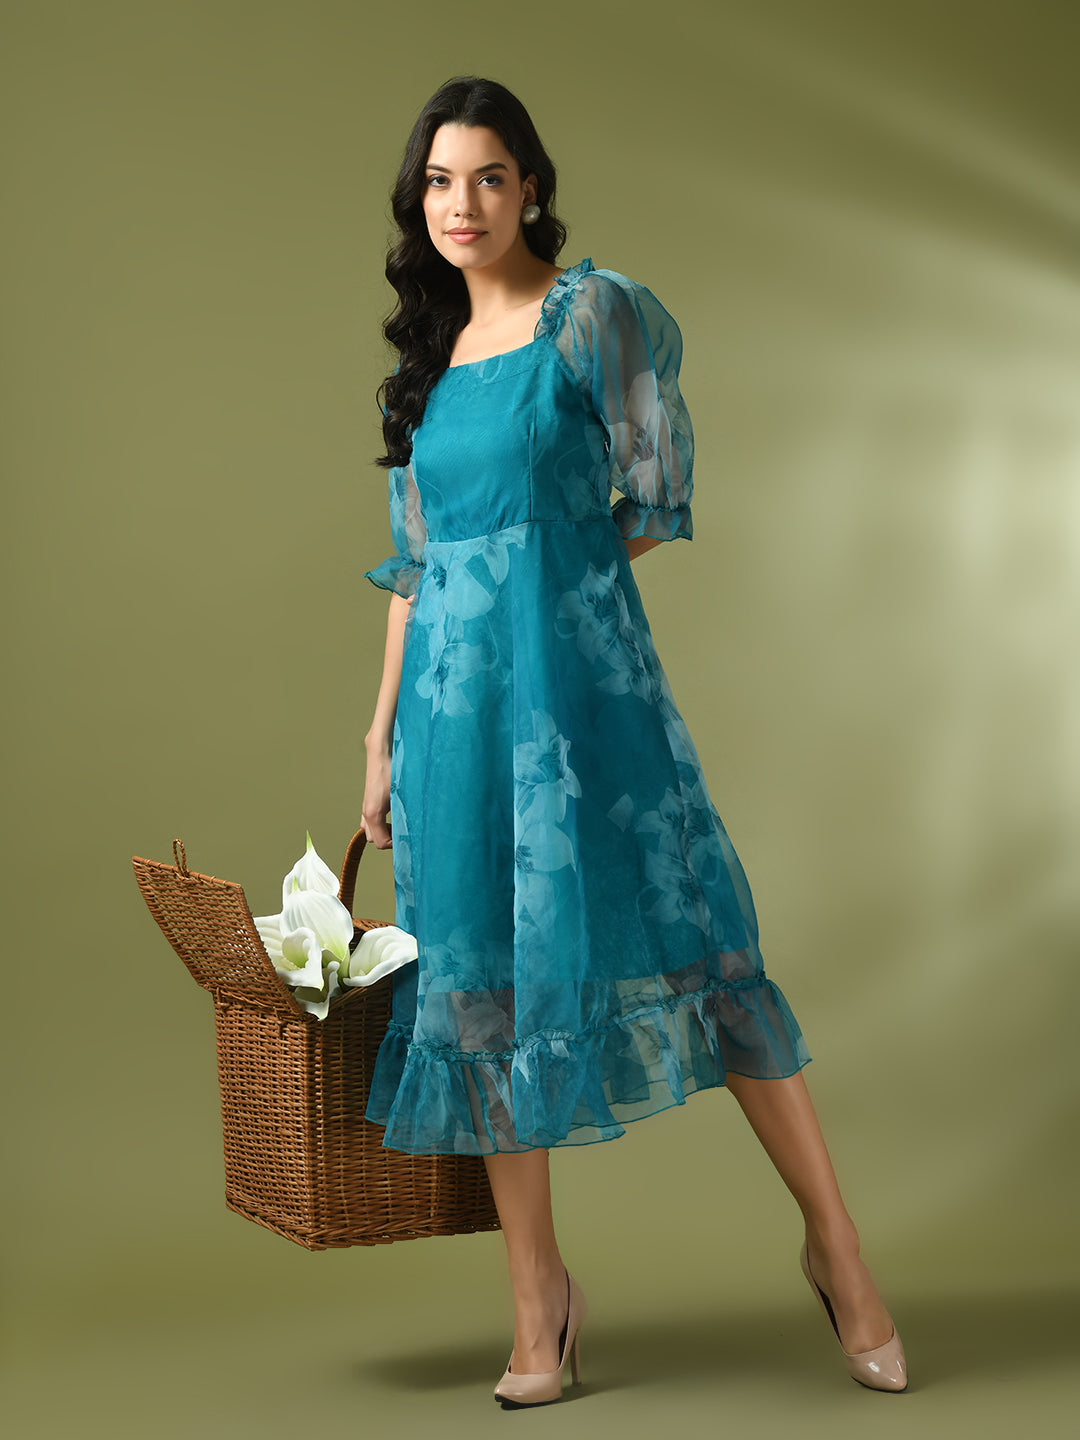 Women's  Teal Printed Square Neck Fit And Flare Party Dress  - Myshka